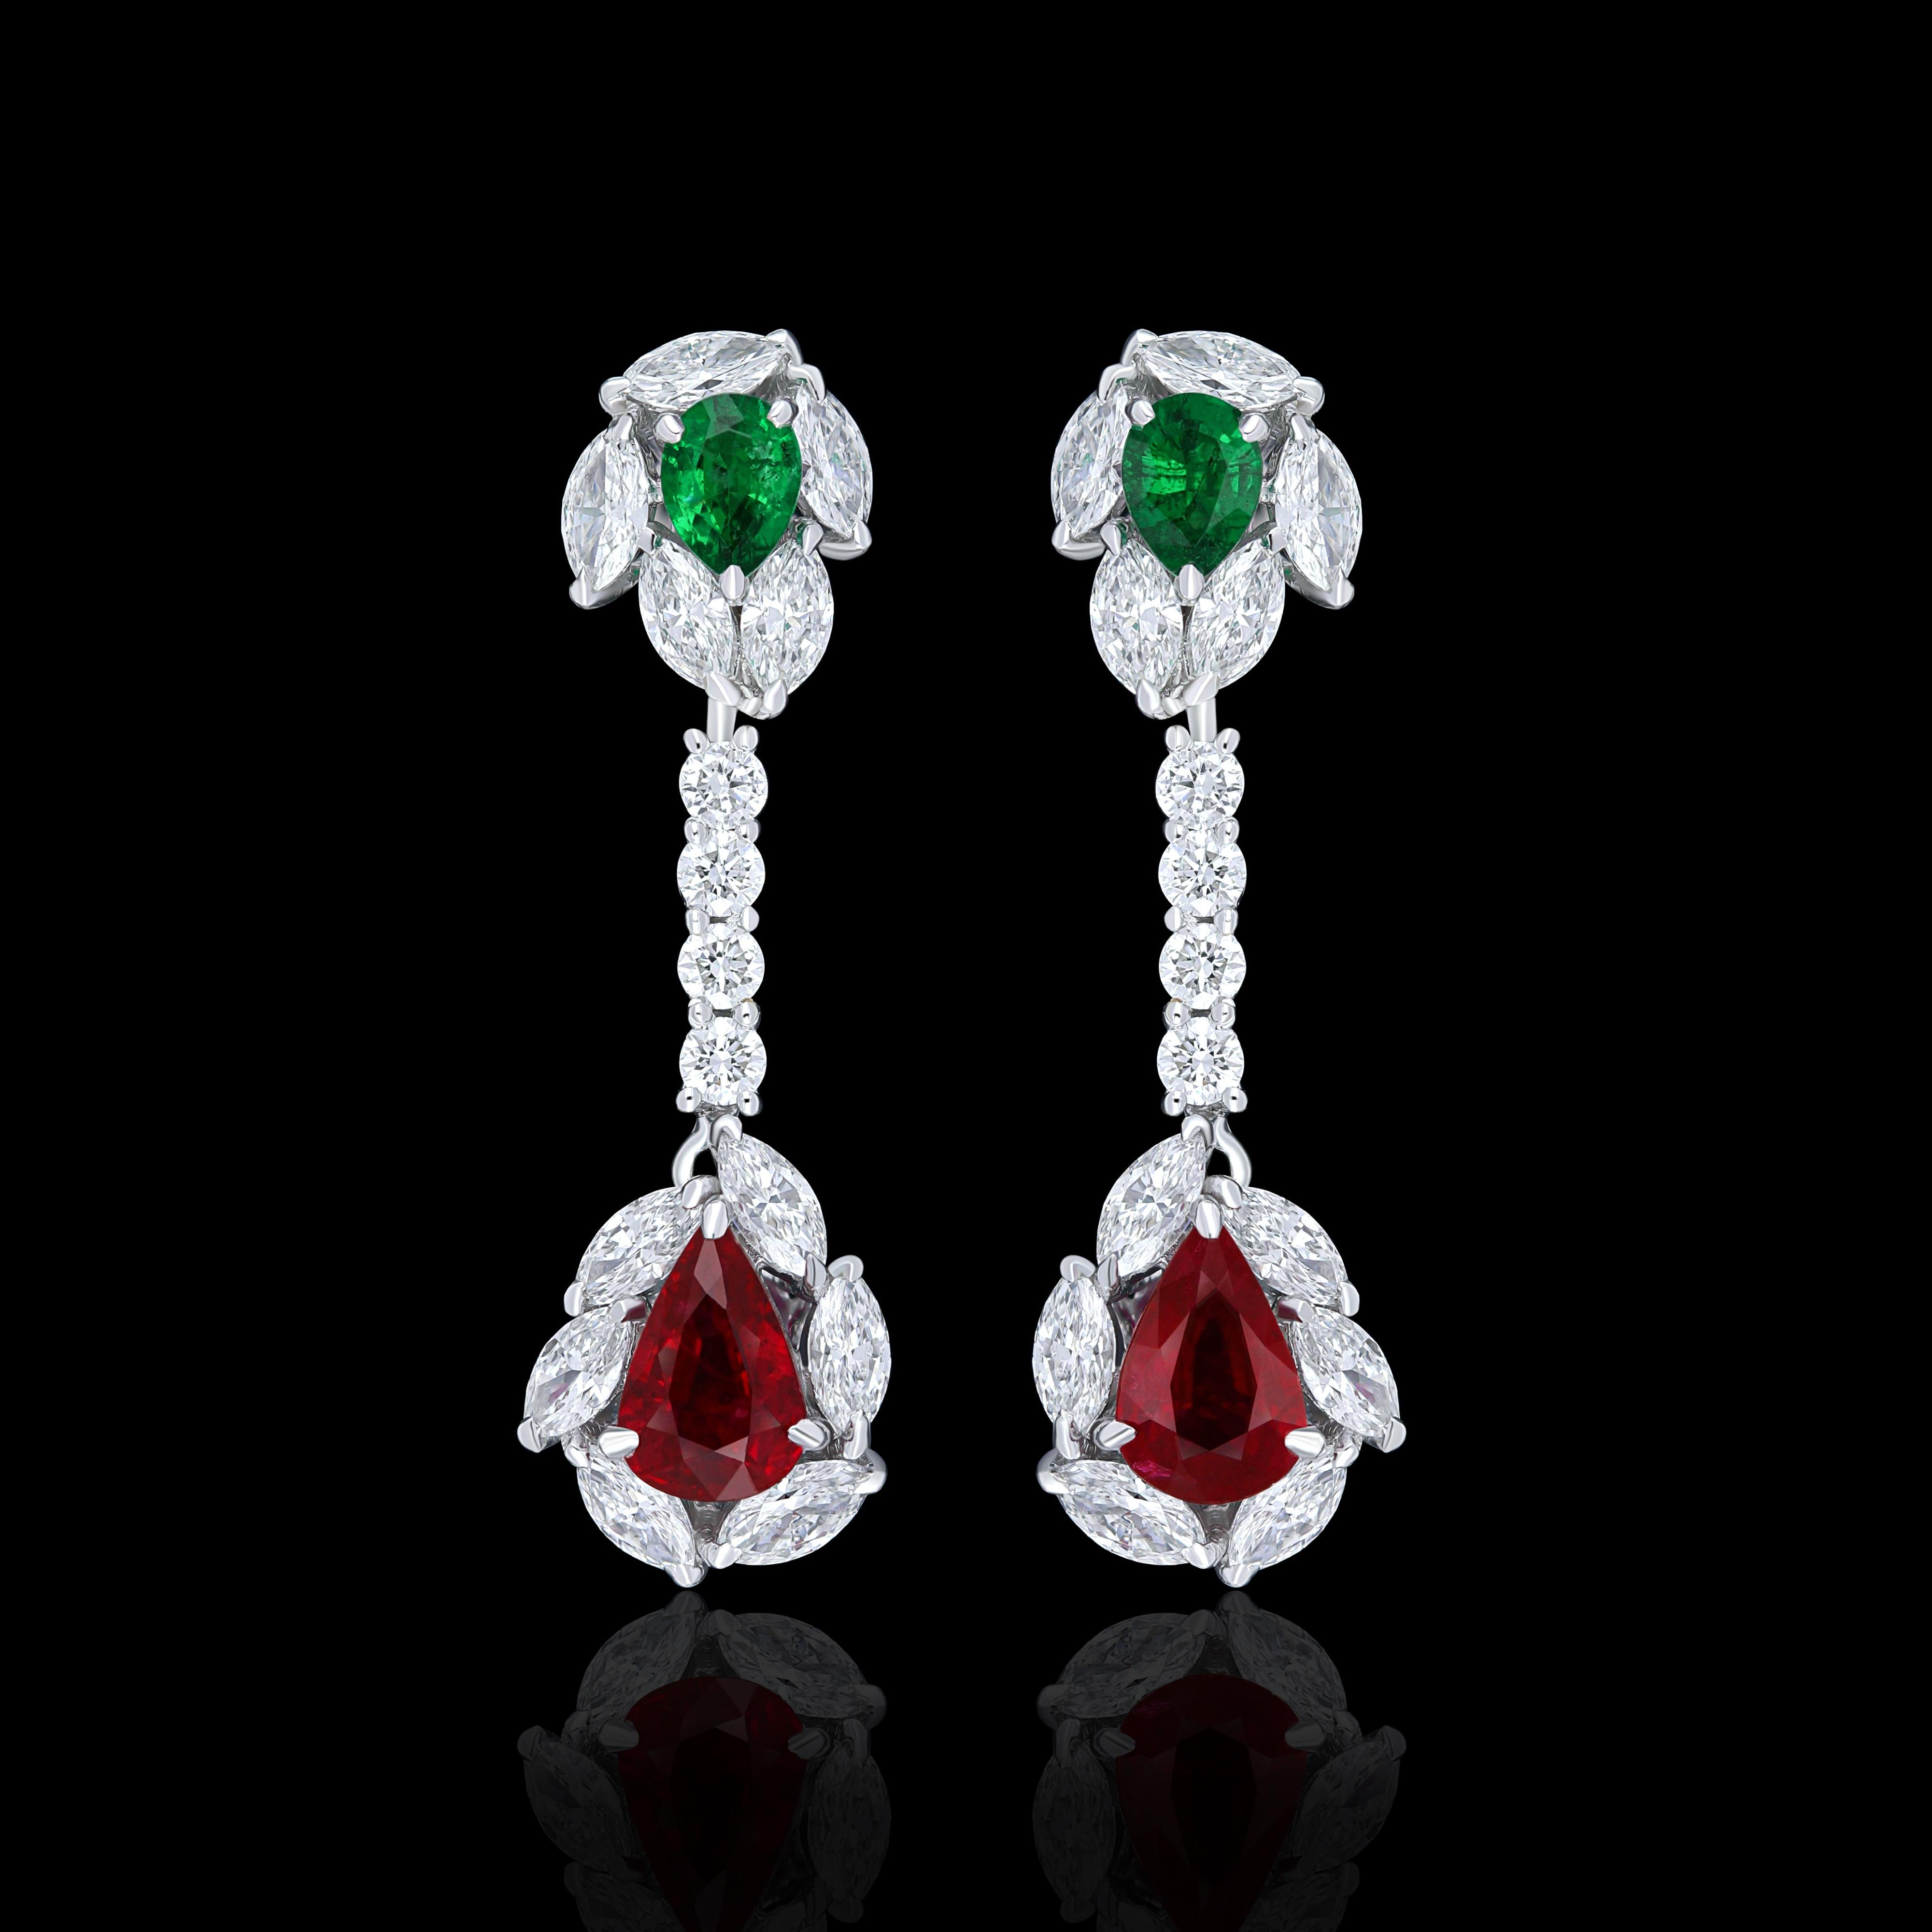 Elegant and exquisitely detailed 18 Karat White Gold Earrings, center set with 0.80Cts .Pear Shape Blood Red Mozambique Ruby and 0.22   Cts of vibrant Emeralds beautifully accented with micro pave set Diamonds, weighing approx. 1.20Cts Beautifully